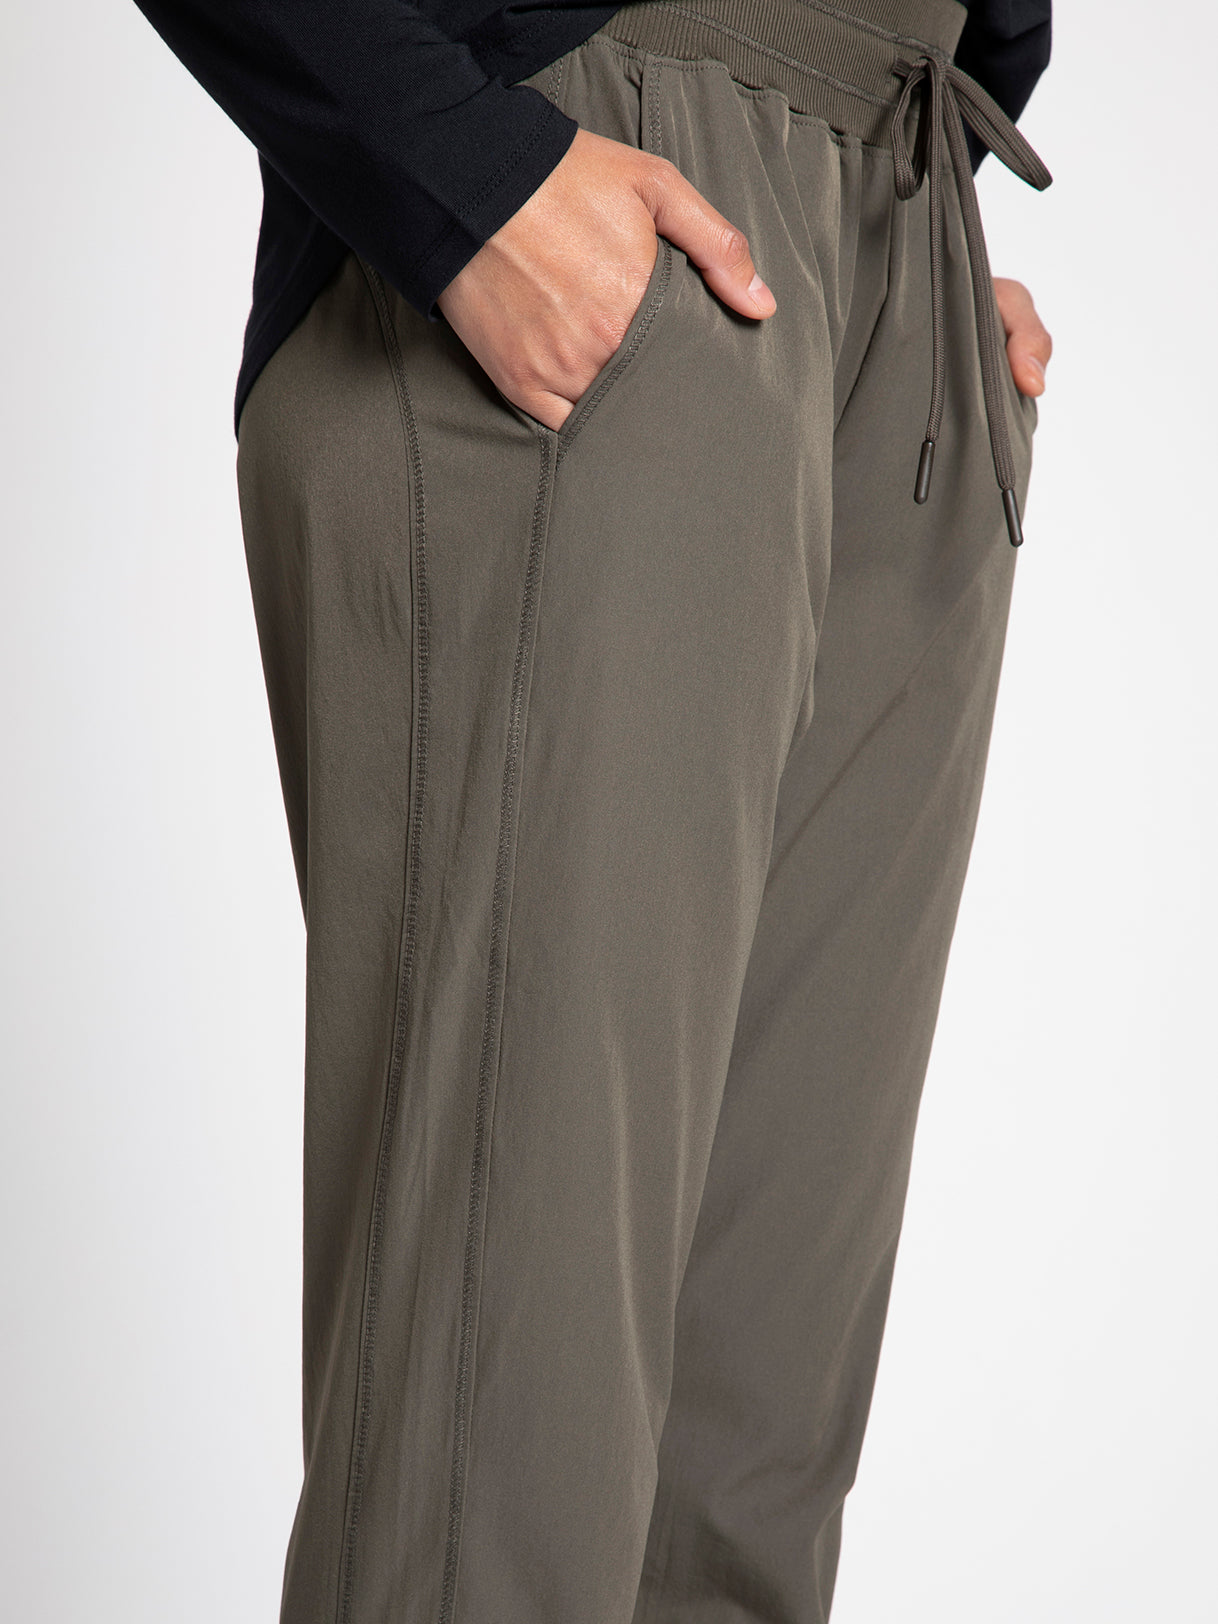 NWT A New Day Olive Pant Size 8 – Thrifty Threads Boutique